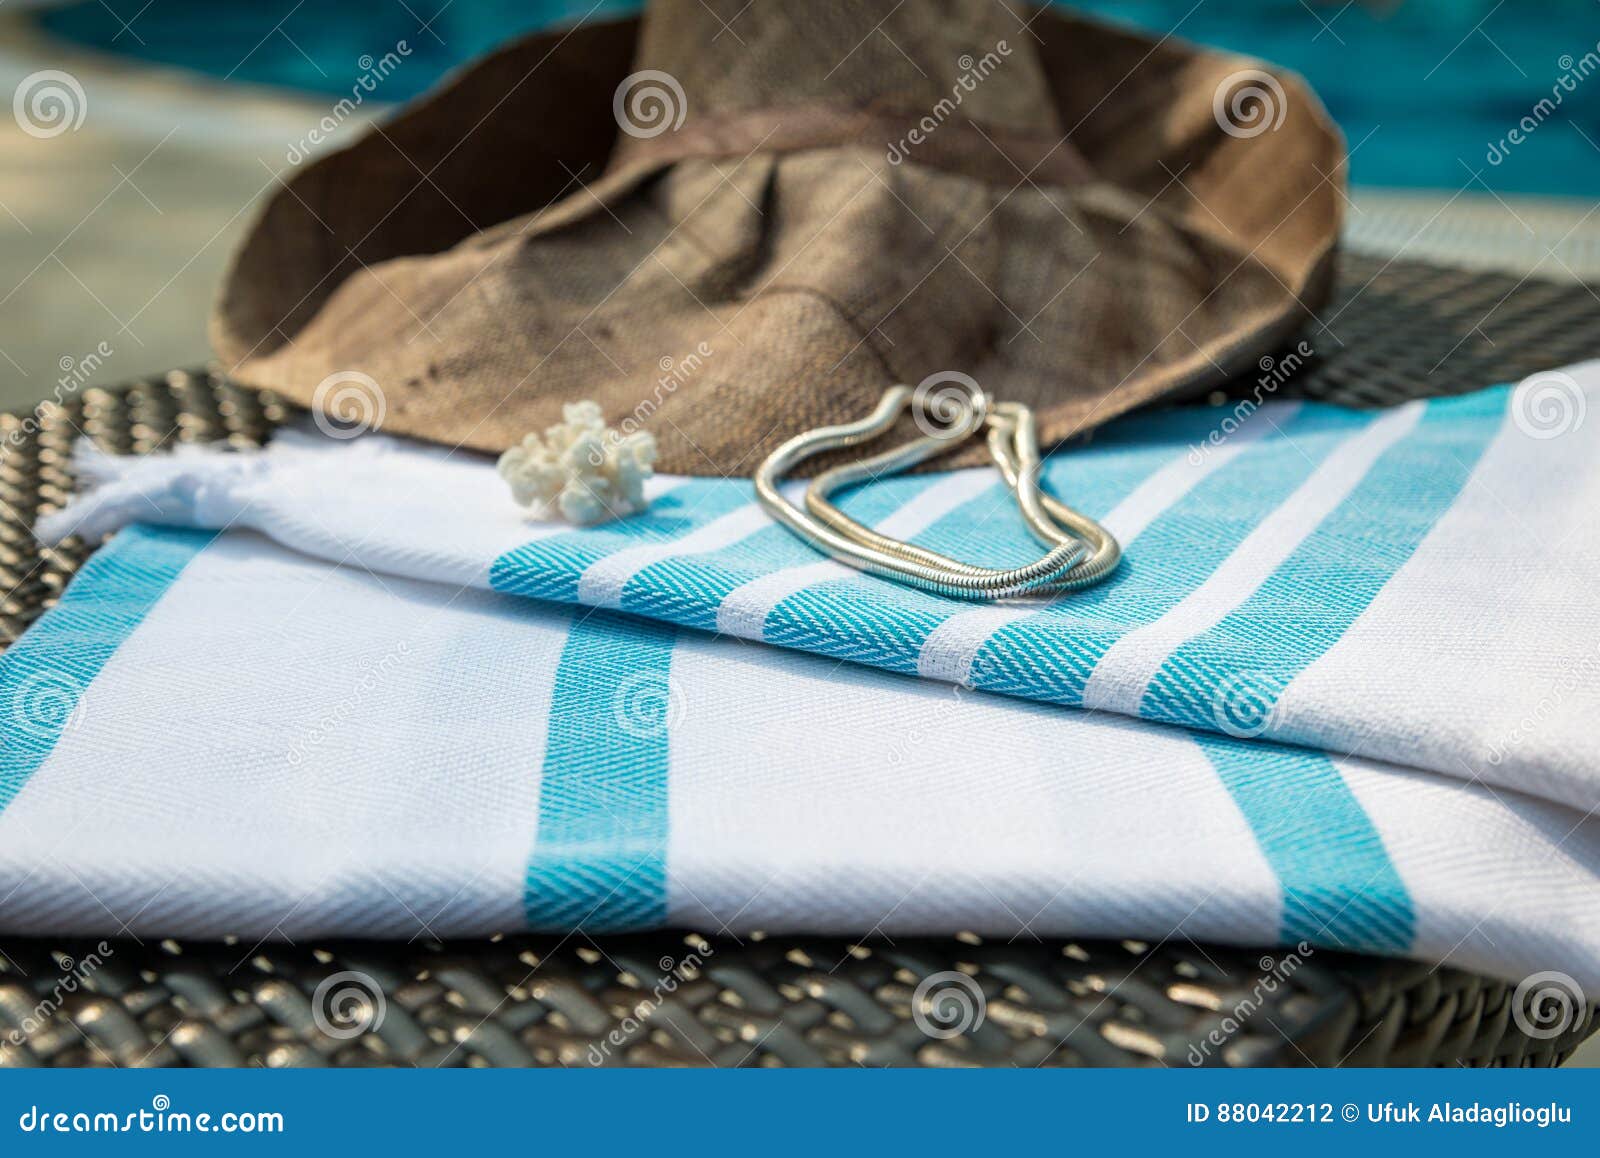 A white and turquoise color Turkish peshtemal, white seashells, white gold necklace and straw hat on rattan lounger. The concept of summer accessories close-up of white and turquoise color Turkish peshtemal, white seashells, white gold necklace and straw hat on rattan lounger with a blue swimming pool as background